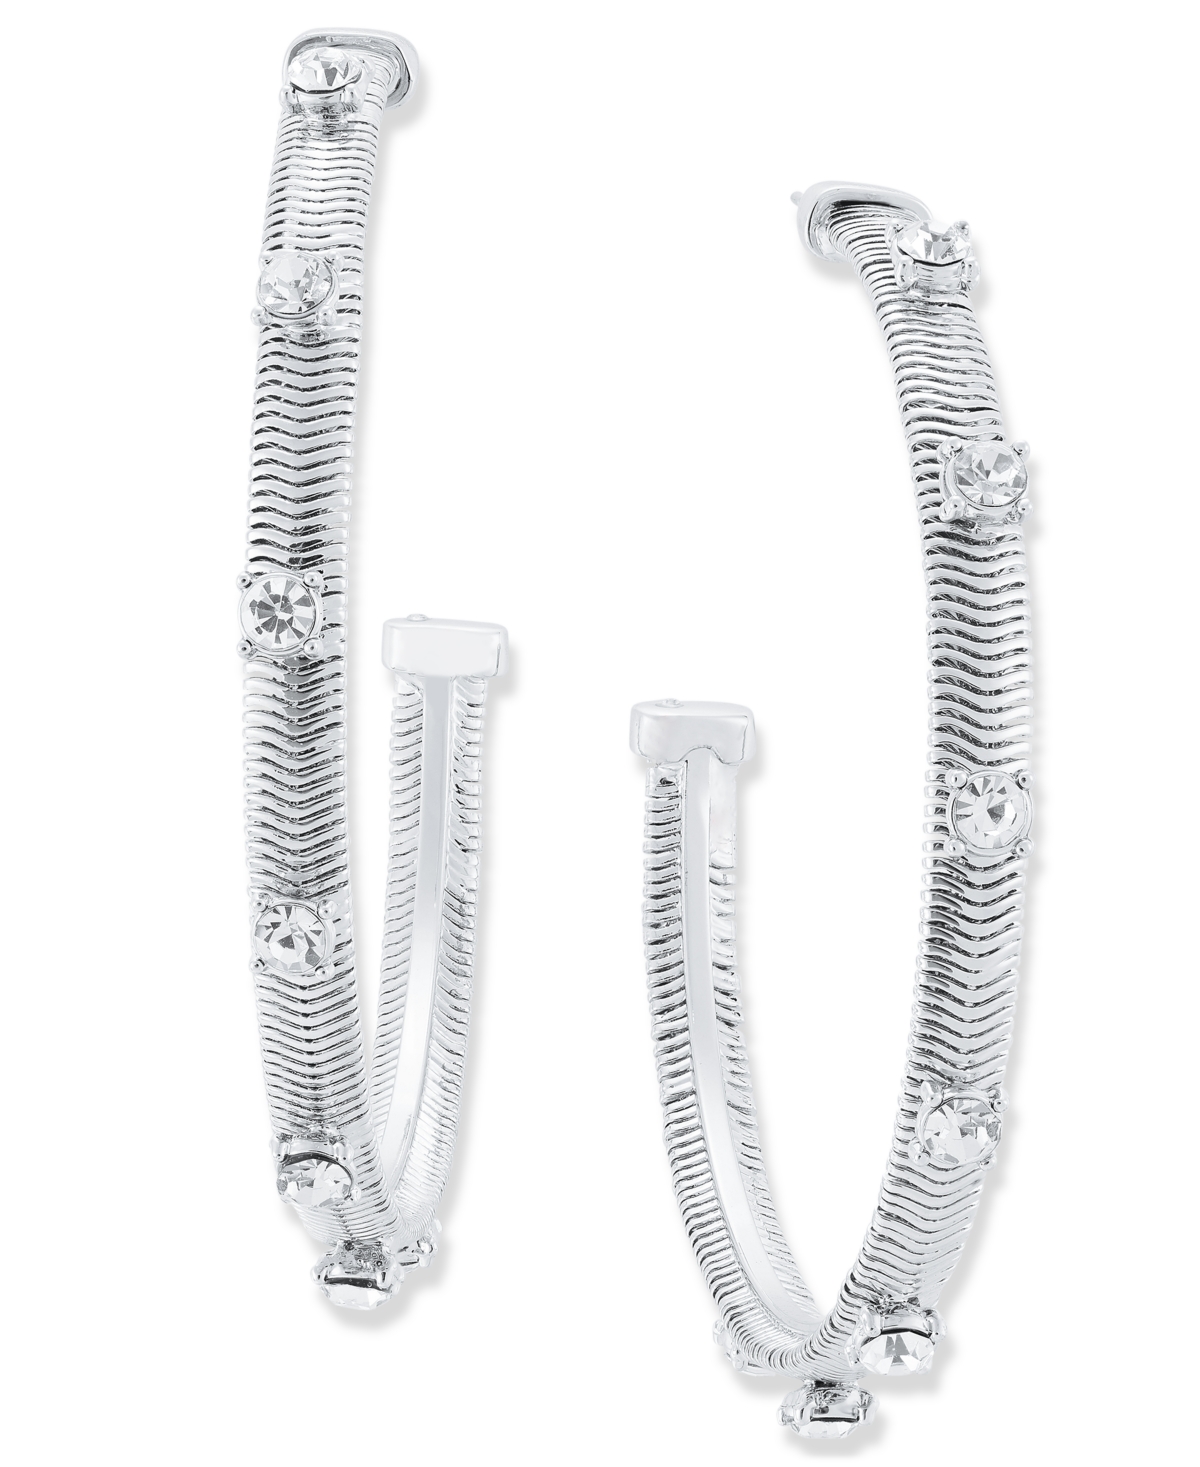 Large Pave Studded Snake Chain C-Hoop Earrings, 2.15", Created for Macy's - Silver